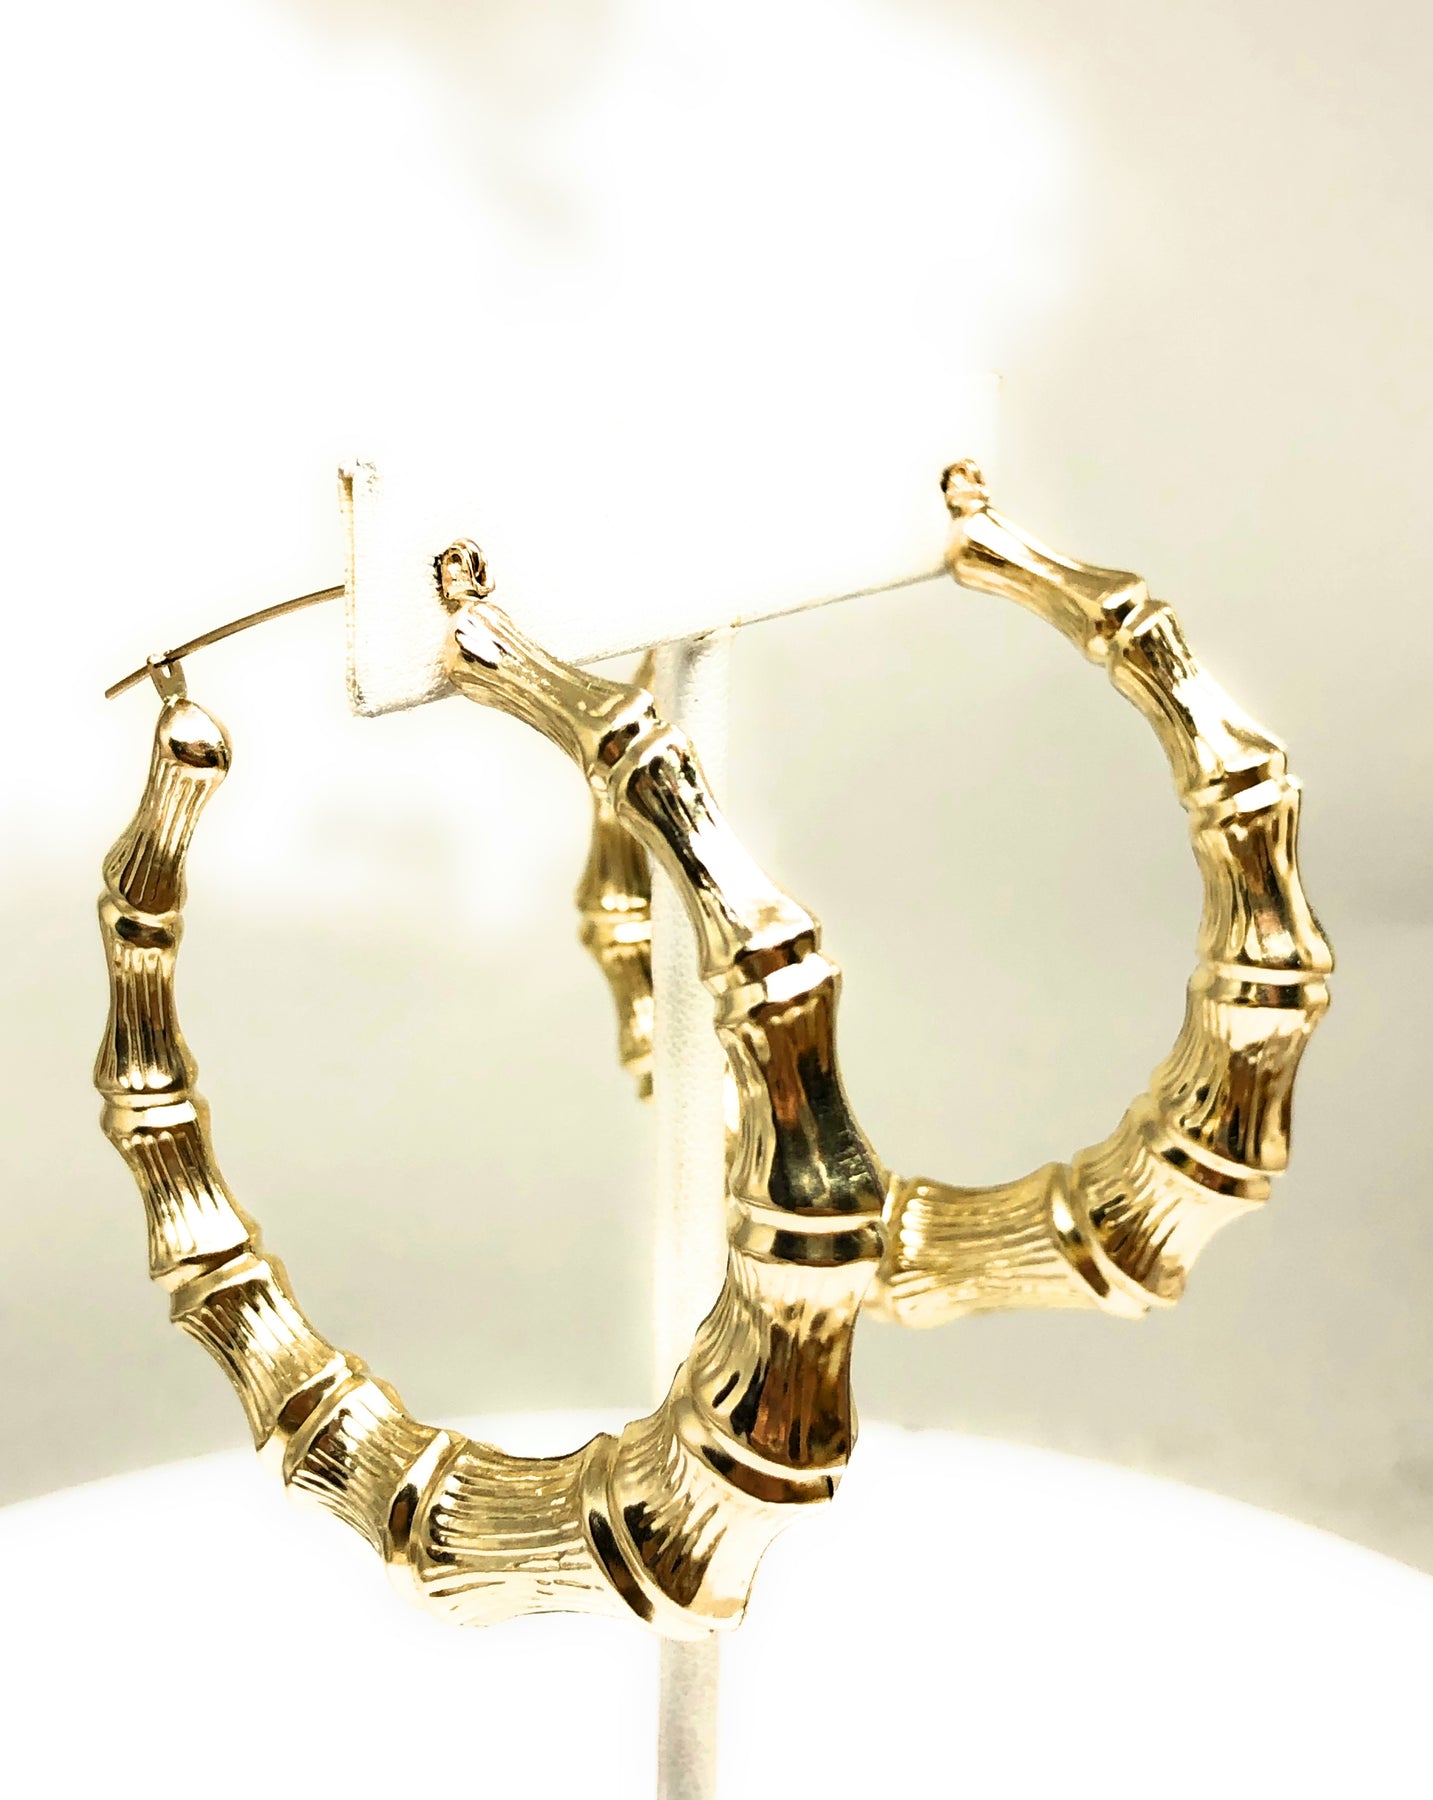 Bamboo Style Hoop Earrings, 3.5 (90MM) Gold (12 Pairs)